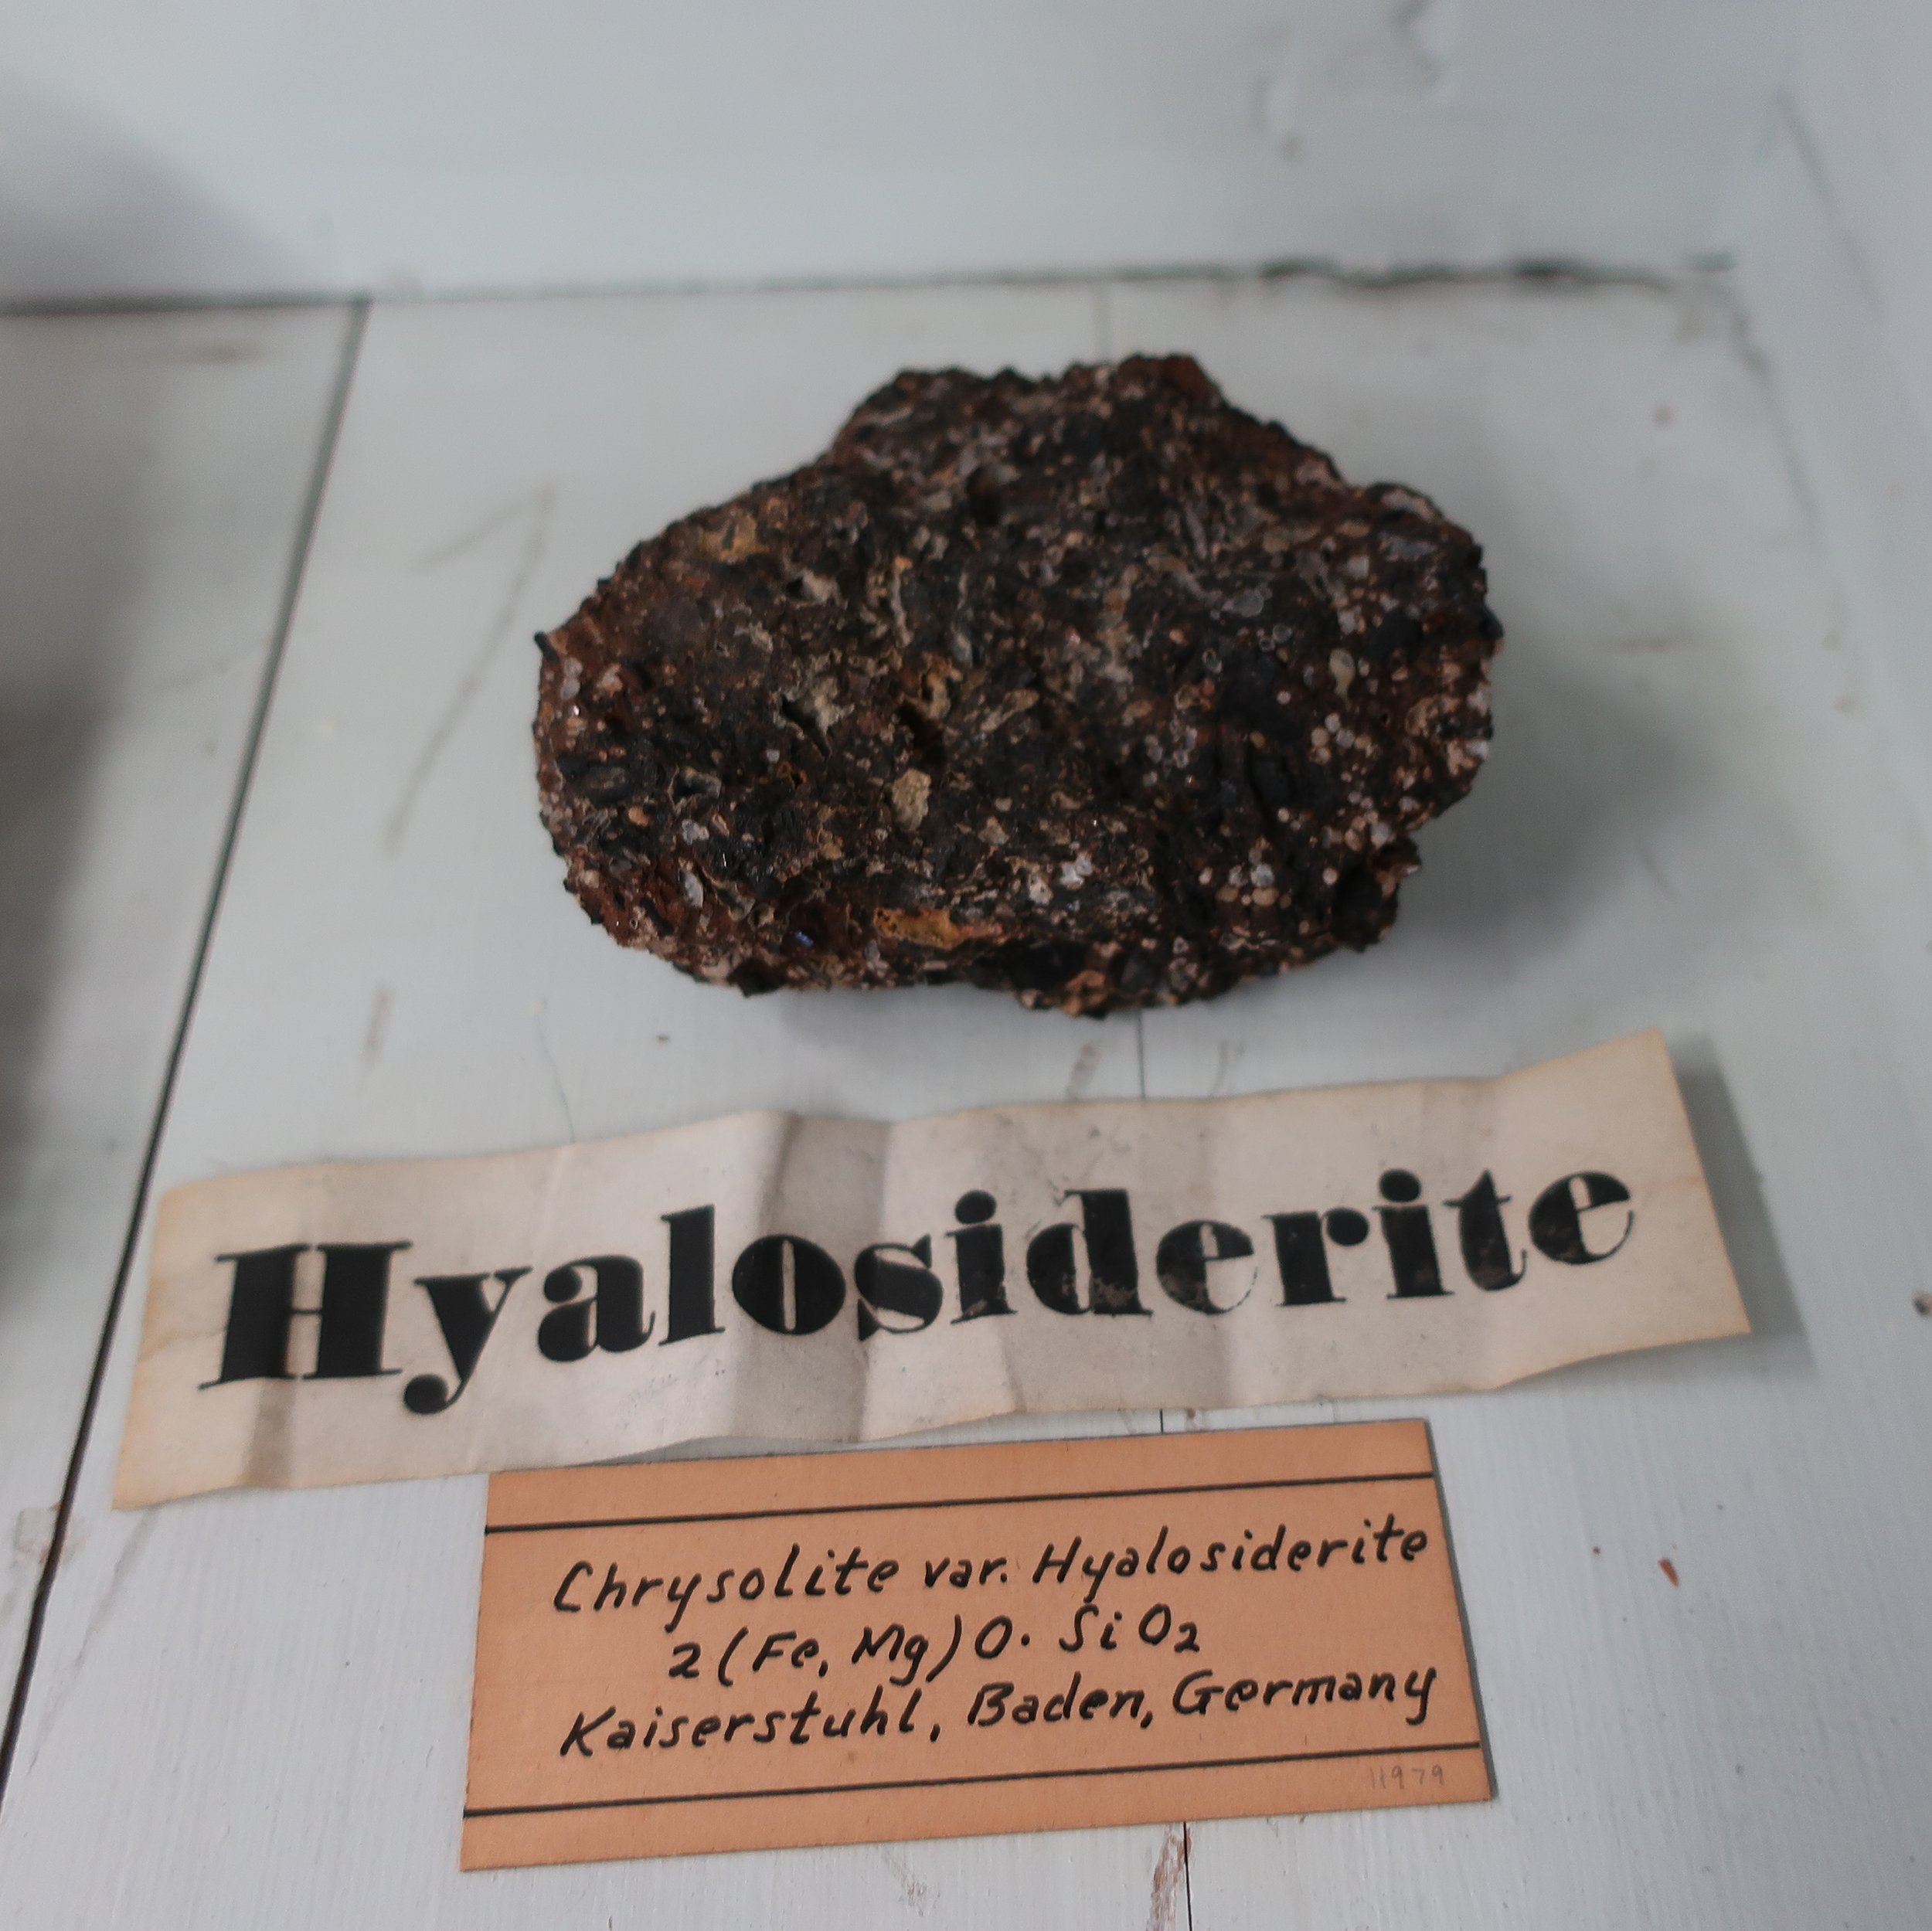   “Hyalosiderite  derives of 2 Greek words signifying Glass &amp; Iron. this mineral was found in amygdaloid rock. It is composed of Silica 32, Iron 30, Magnesia 32, Potash 3. Some mineralogists have considered this species a variety of Chrysolite. C